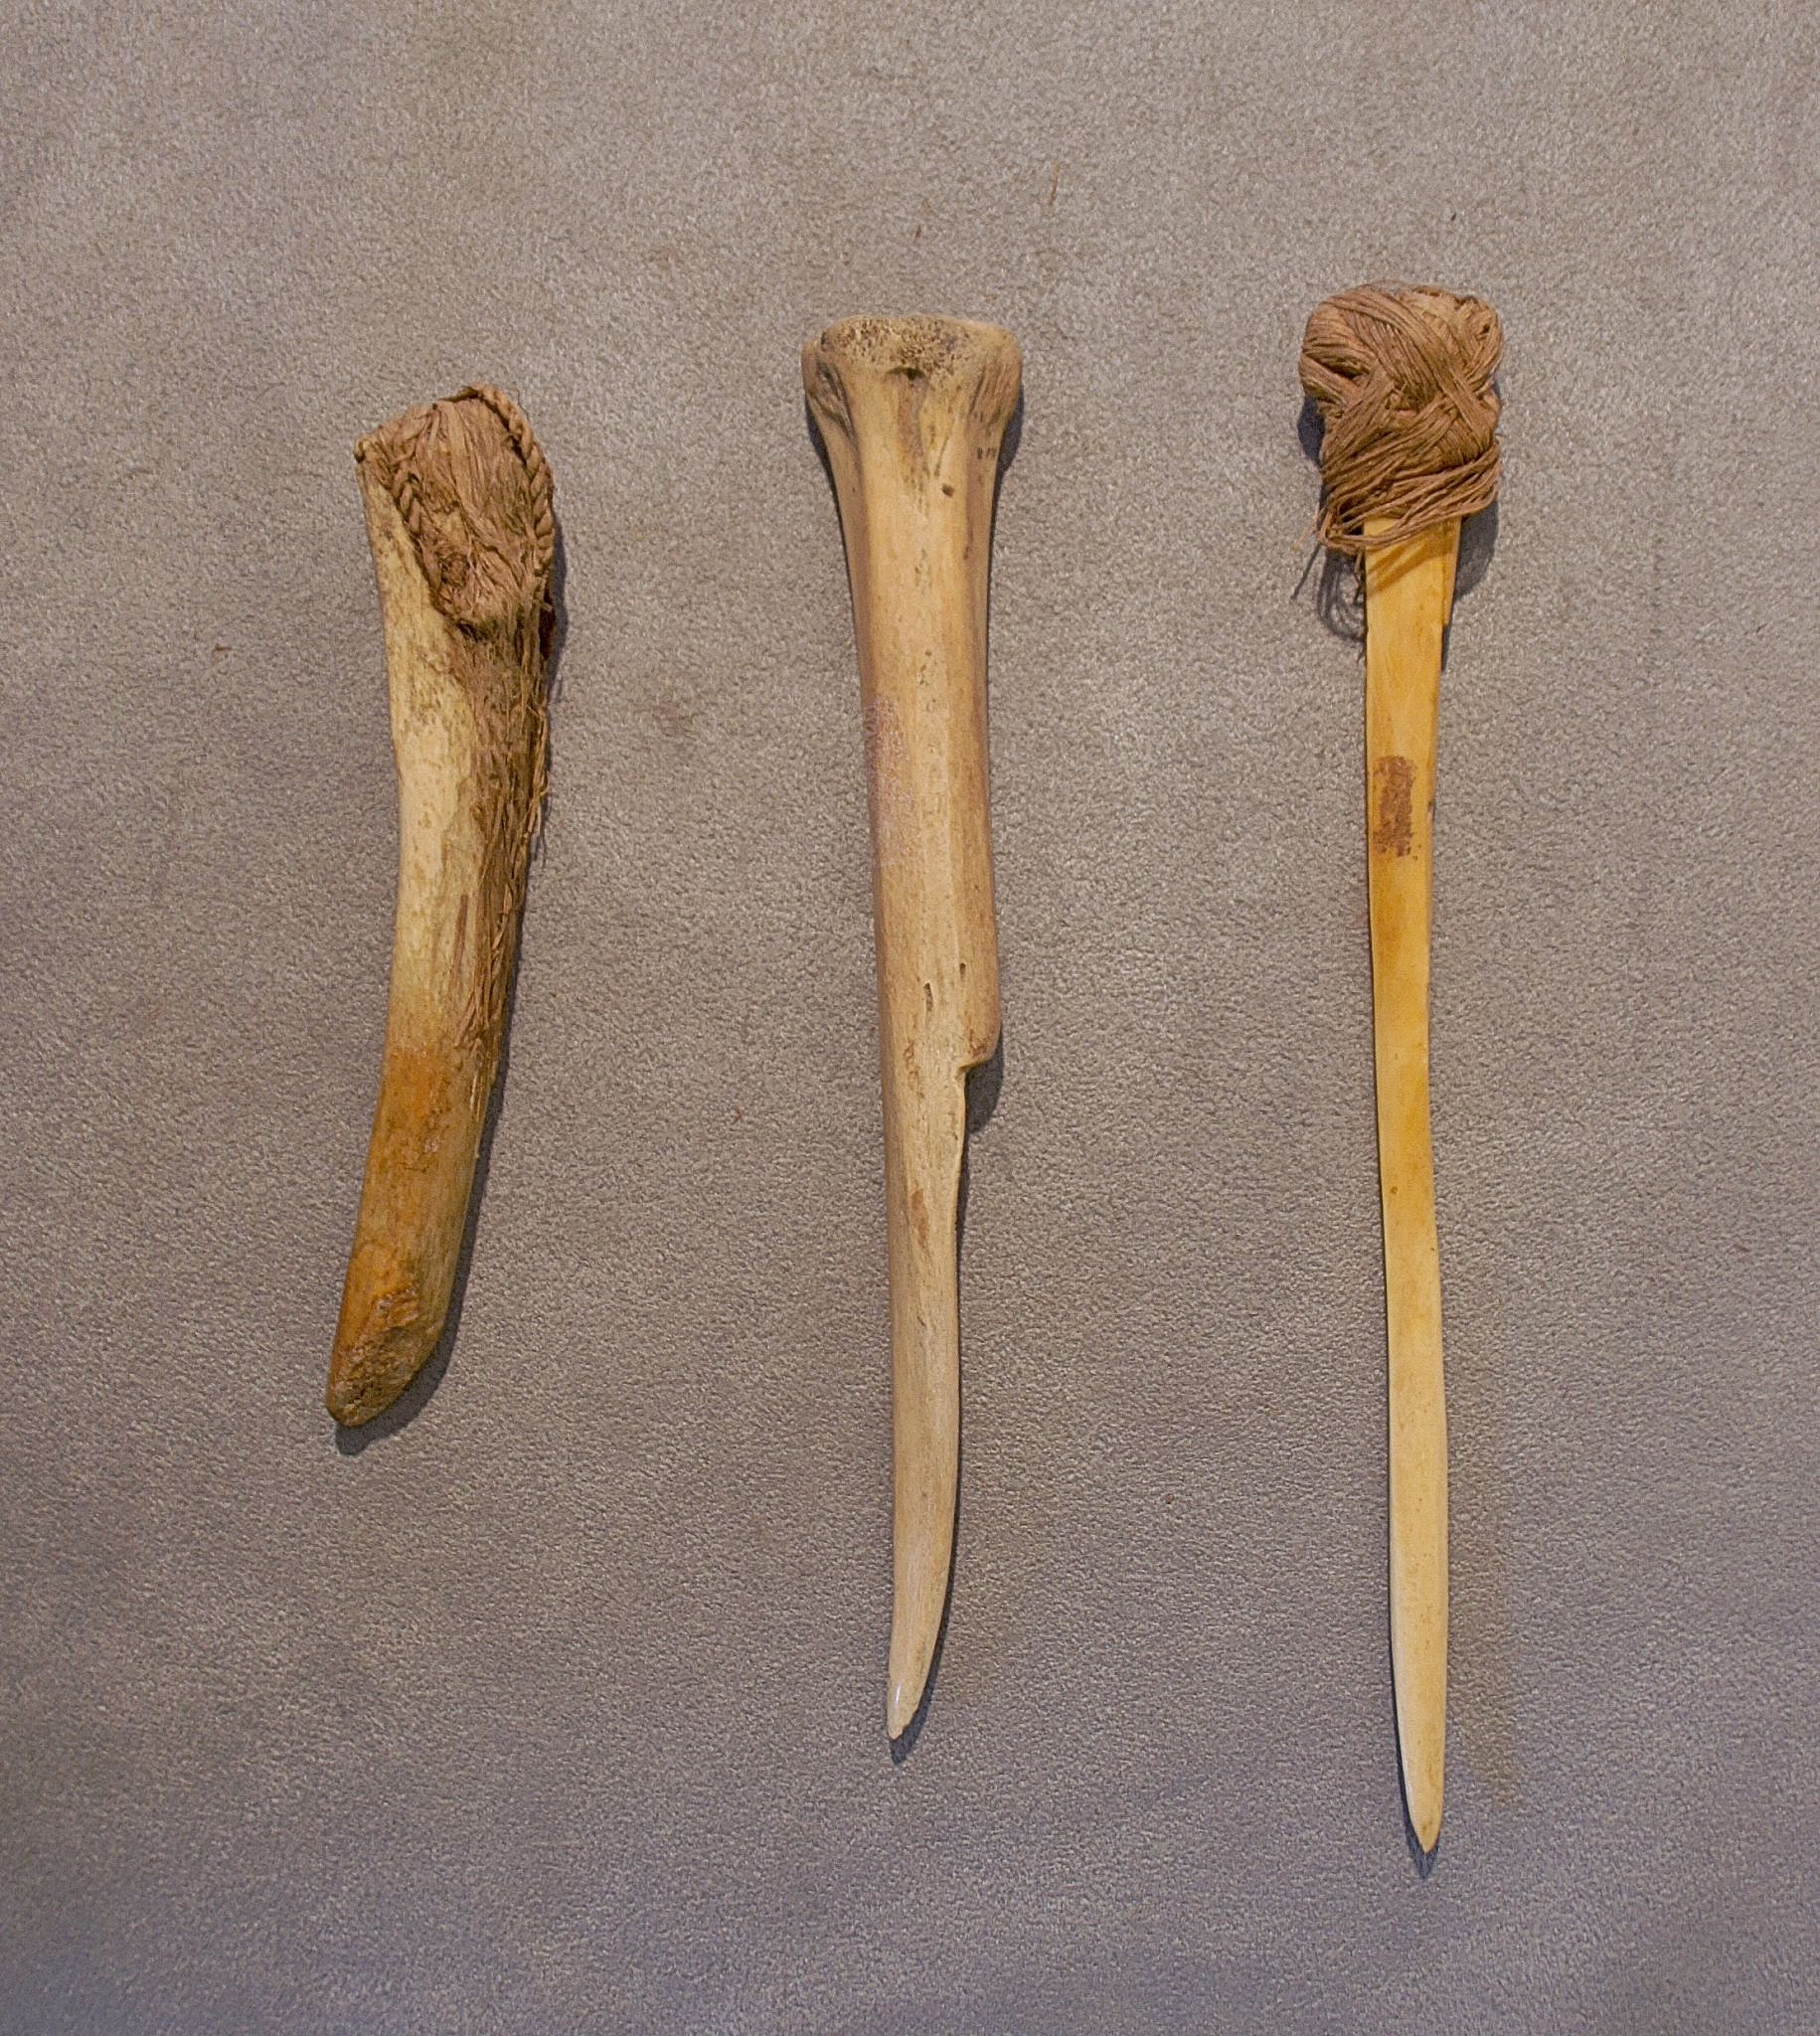 Chile, Three Bone Tools for Chipping and Opening Clam Shells
These tools were made from sea lion ribs.  The shorter one was used for chipping stone points.  The two longer ones were used for opening clams and mussels.  The hemp wrapped end was to protect the hand when opening shells.
Media: Bone
Dimensions: Lengths Vary: 5.75" - 8"
n6032